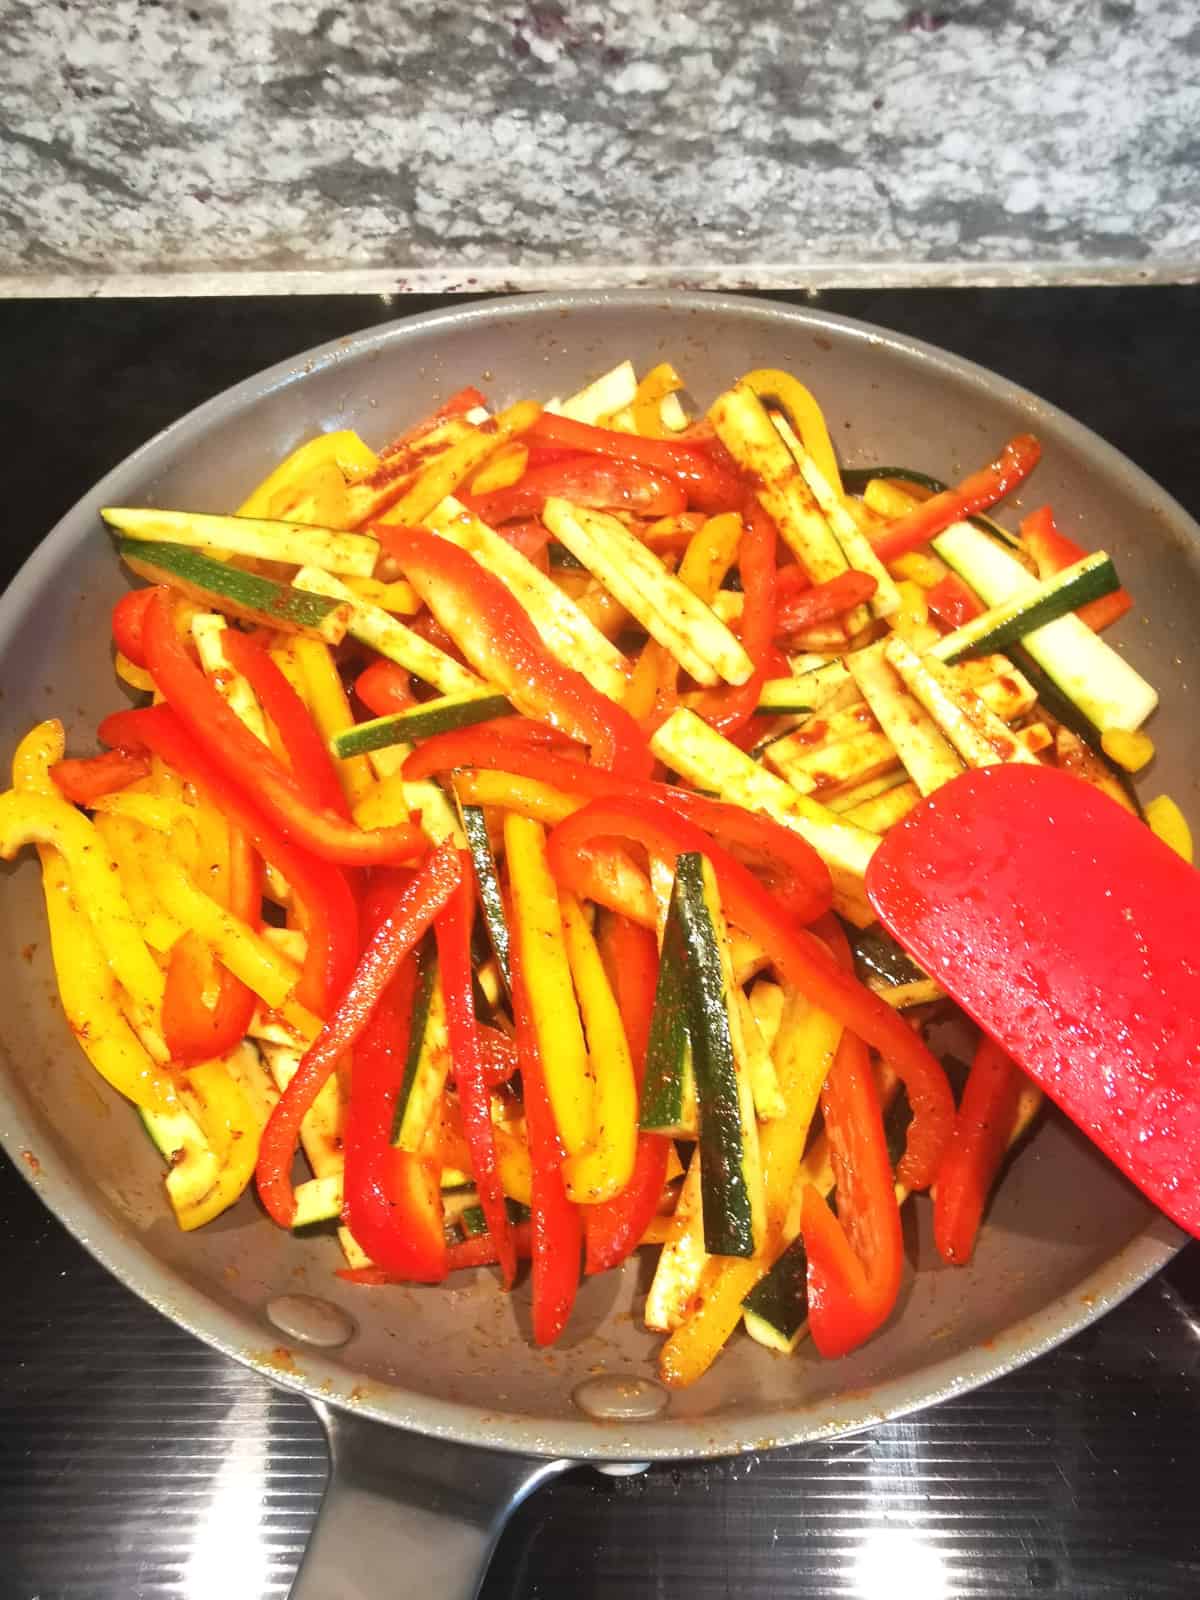 onion, bell peppers and zucchini sauteed in frying pan with red spatula